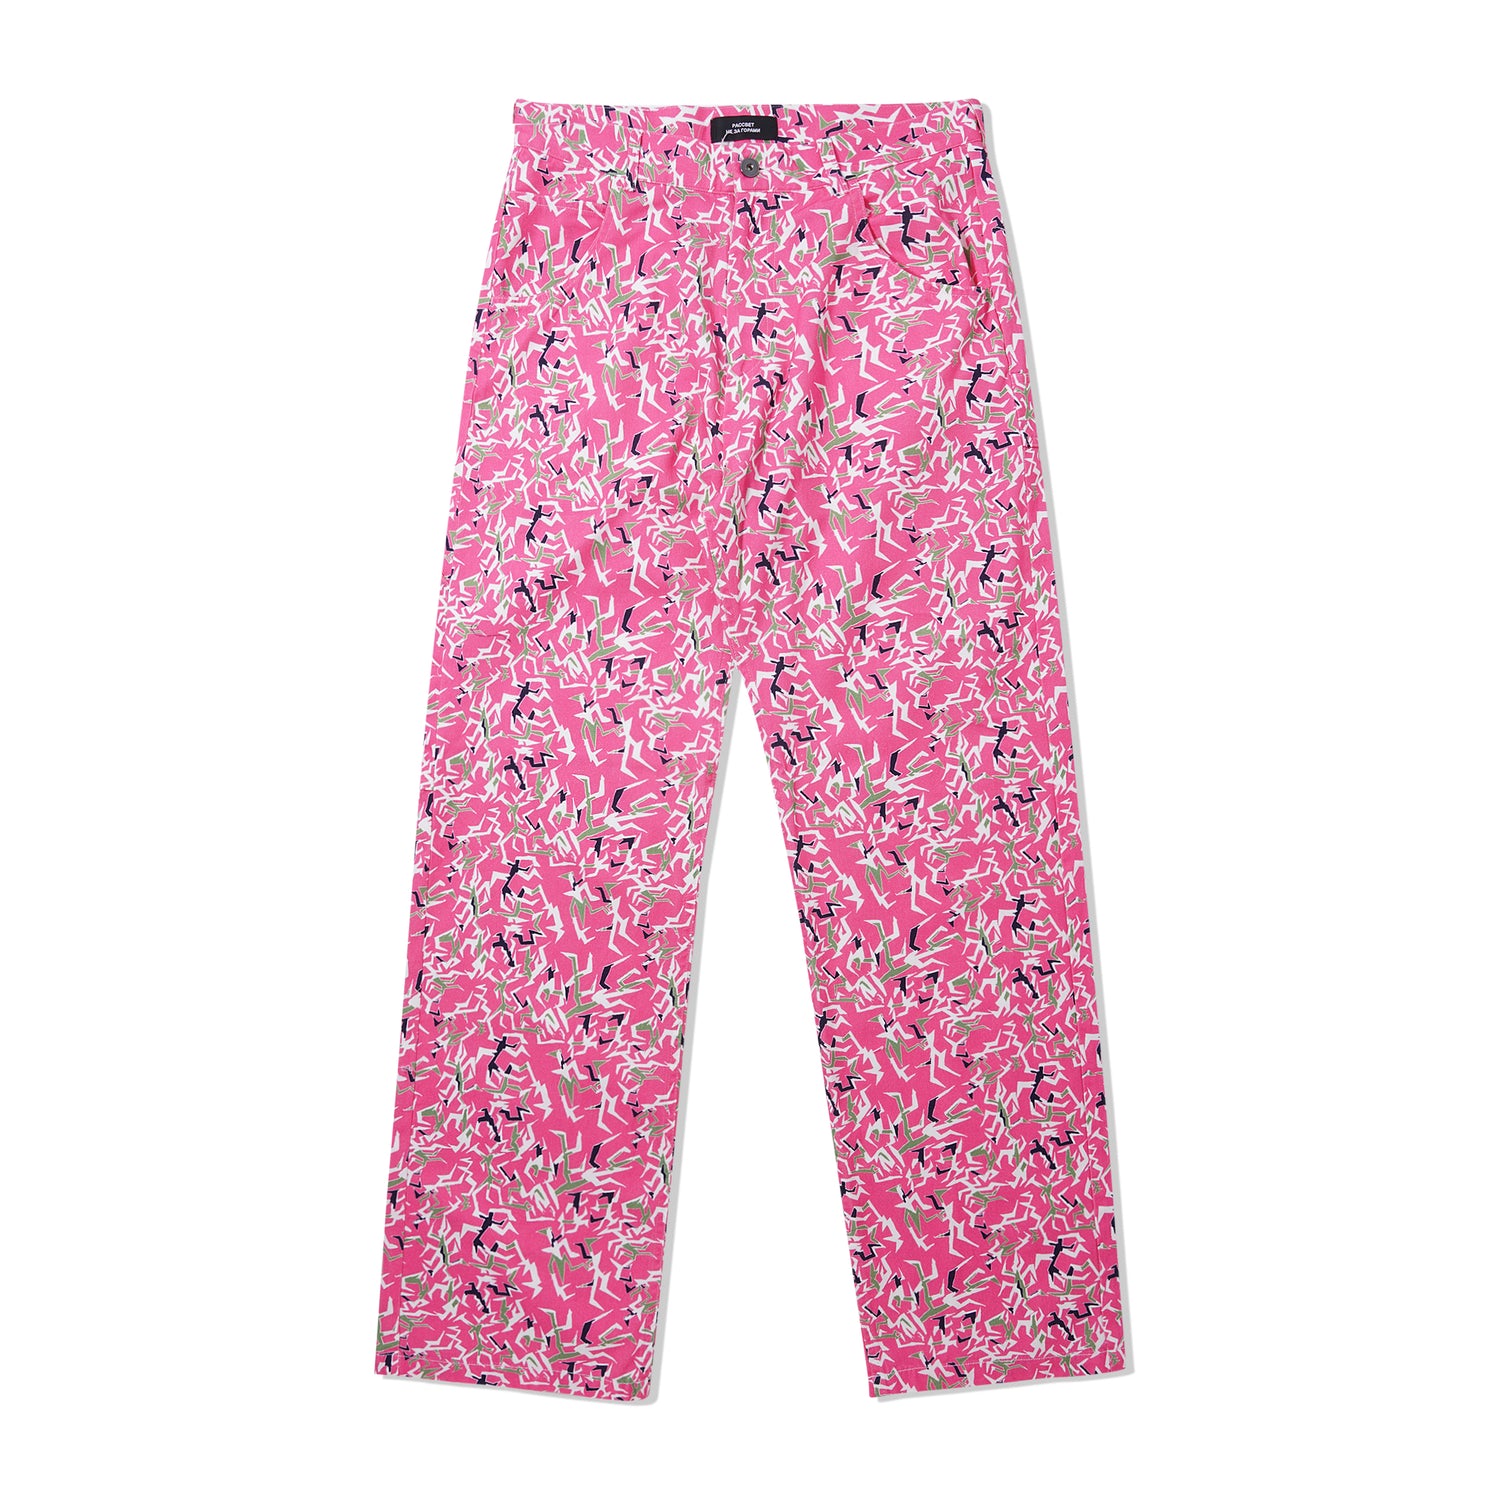 Workwear Floral Woven Pants, Pink